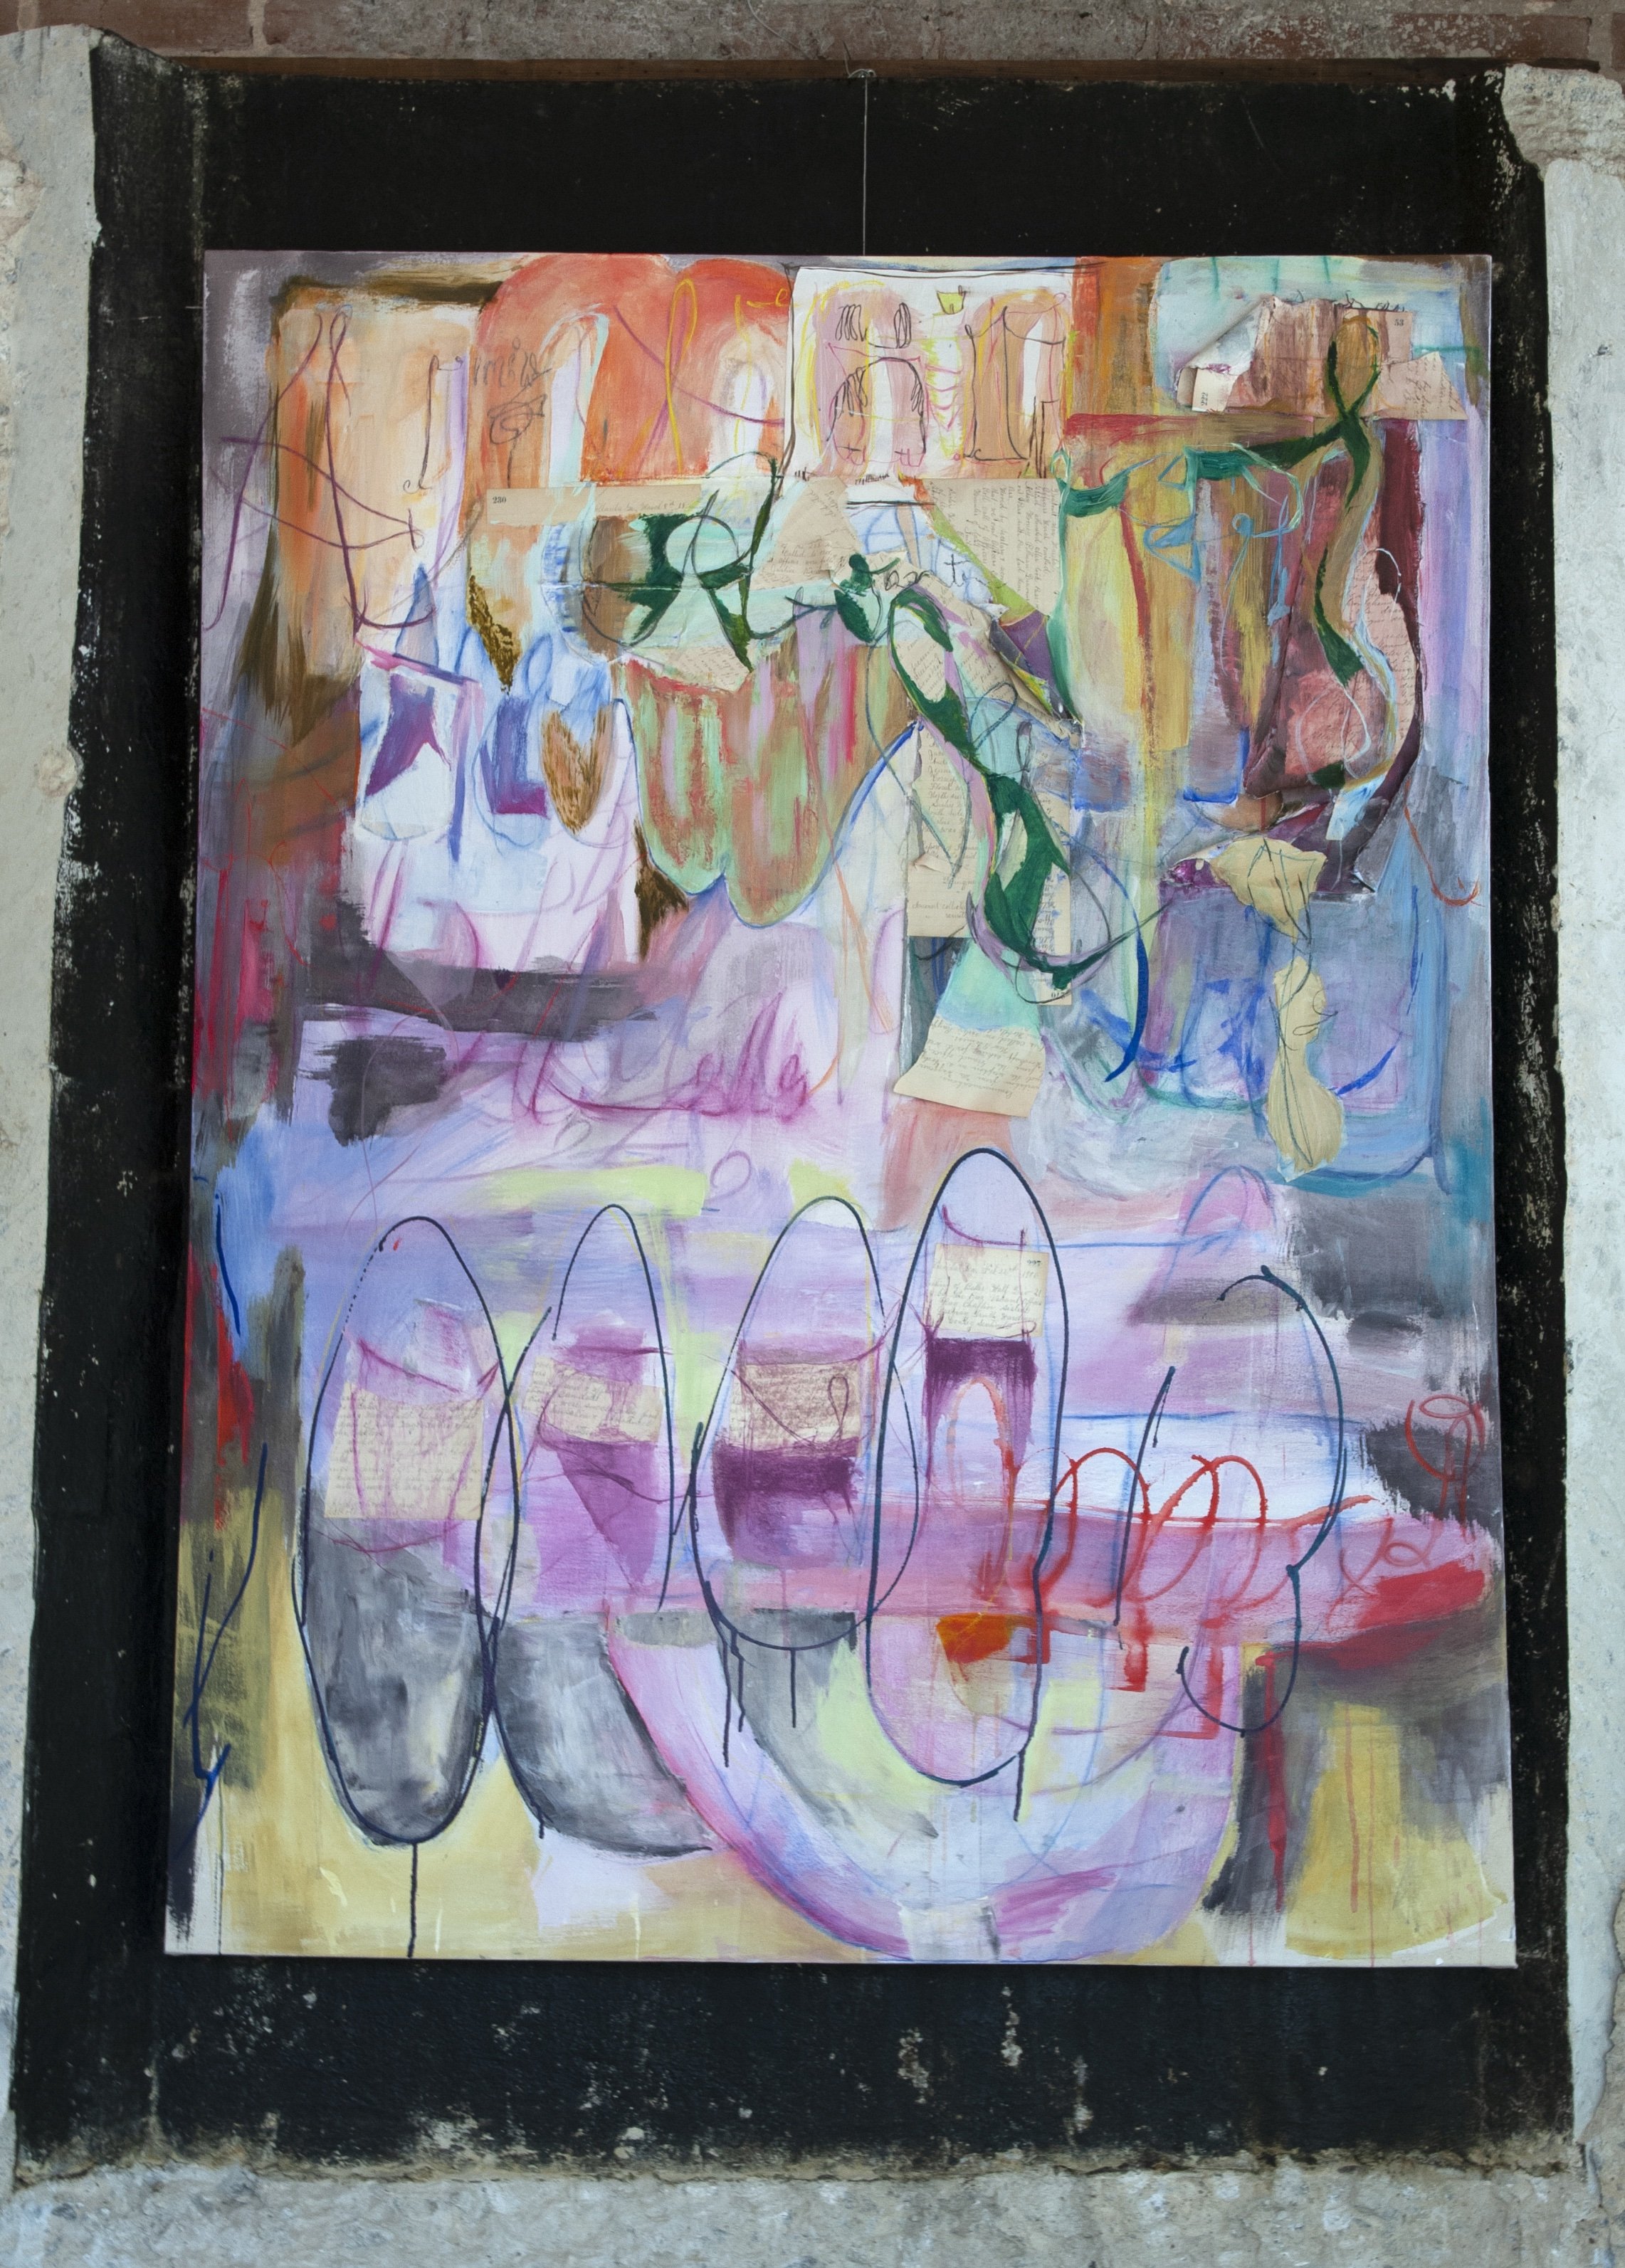  Letter Relics, 2023  Diptych  54 x 60 inches   Acrylic, crayon, estate sale paper on canvas     